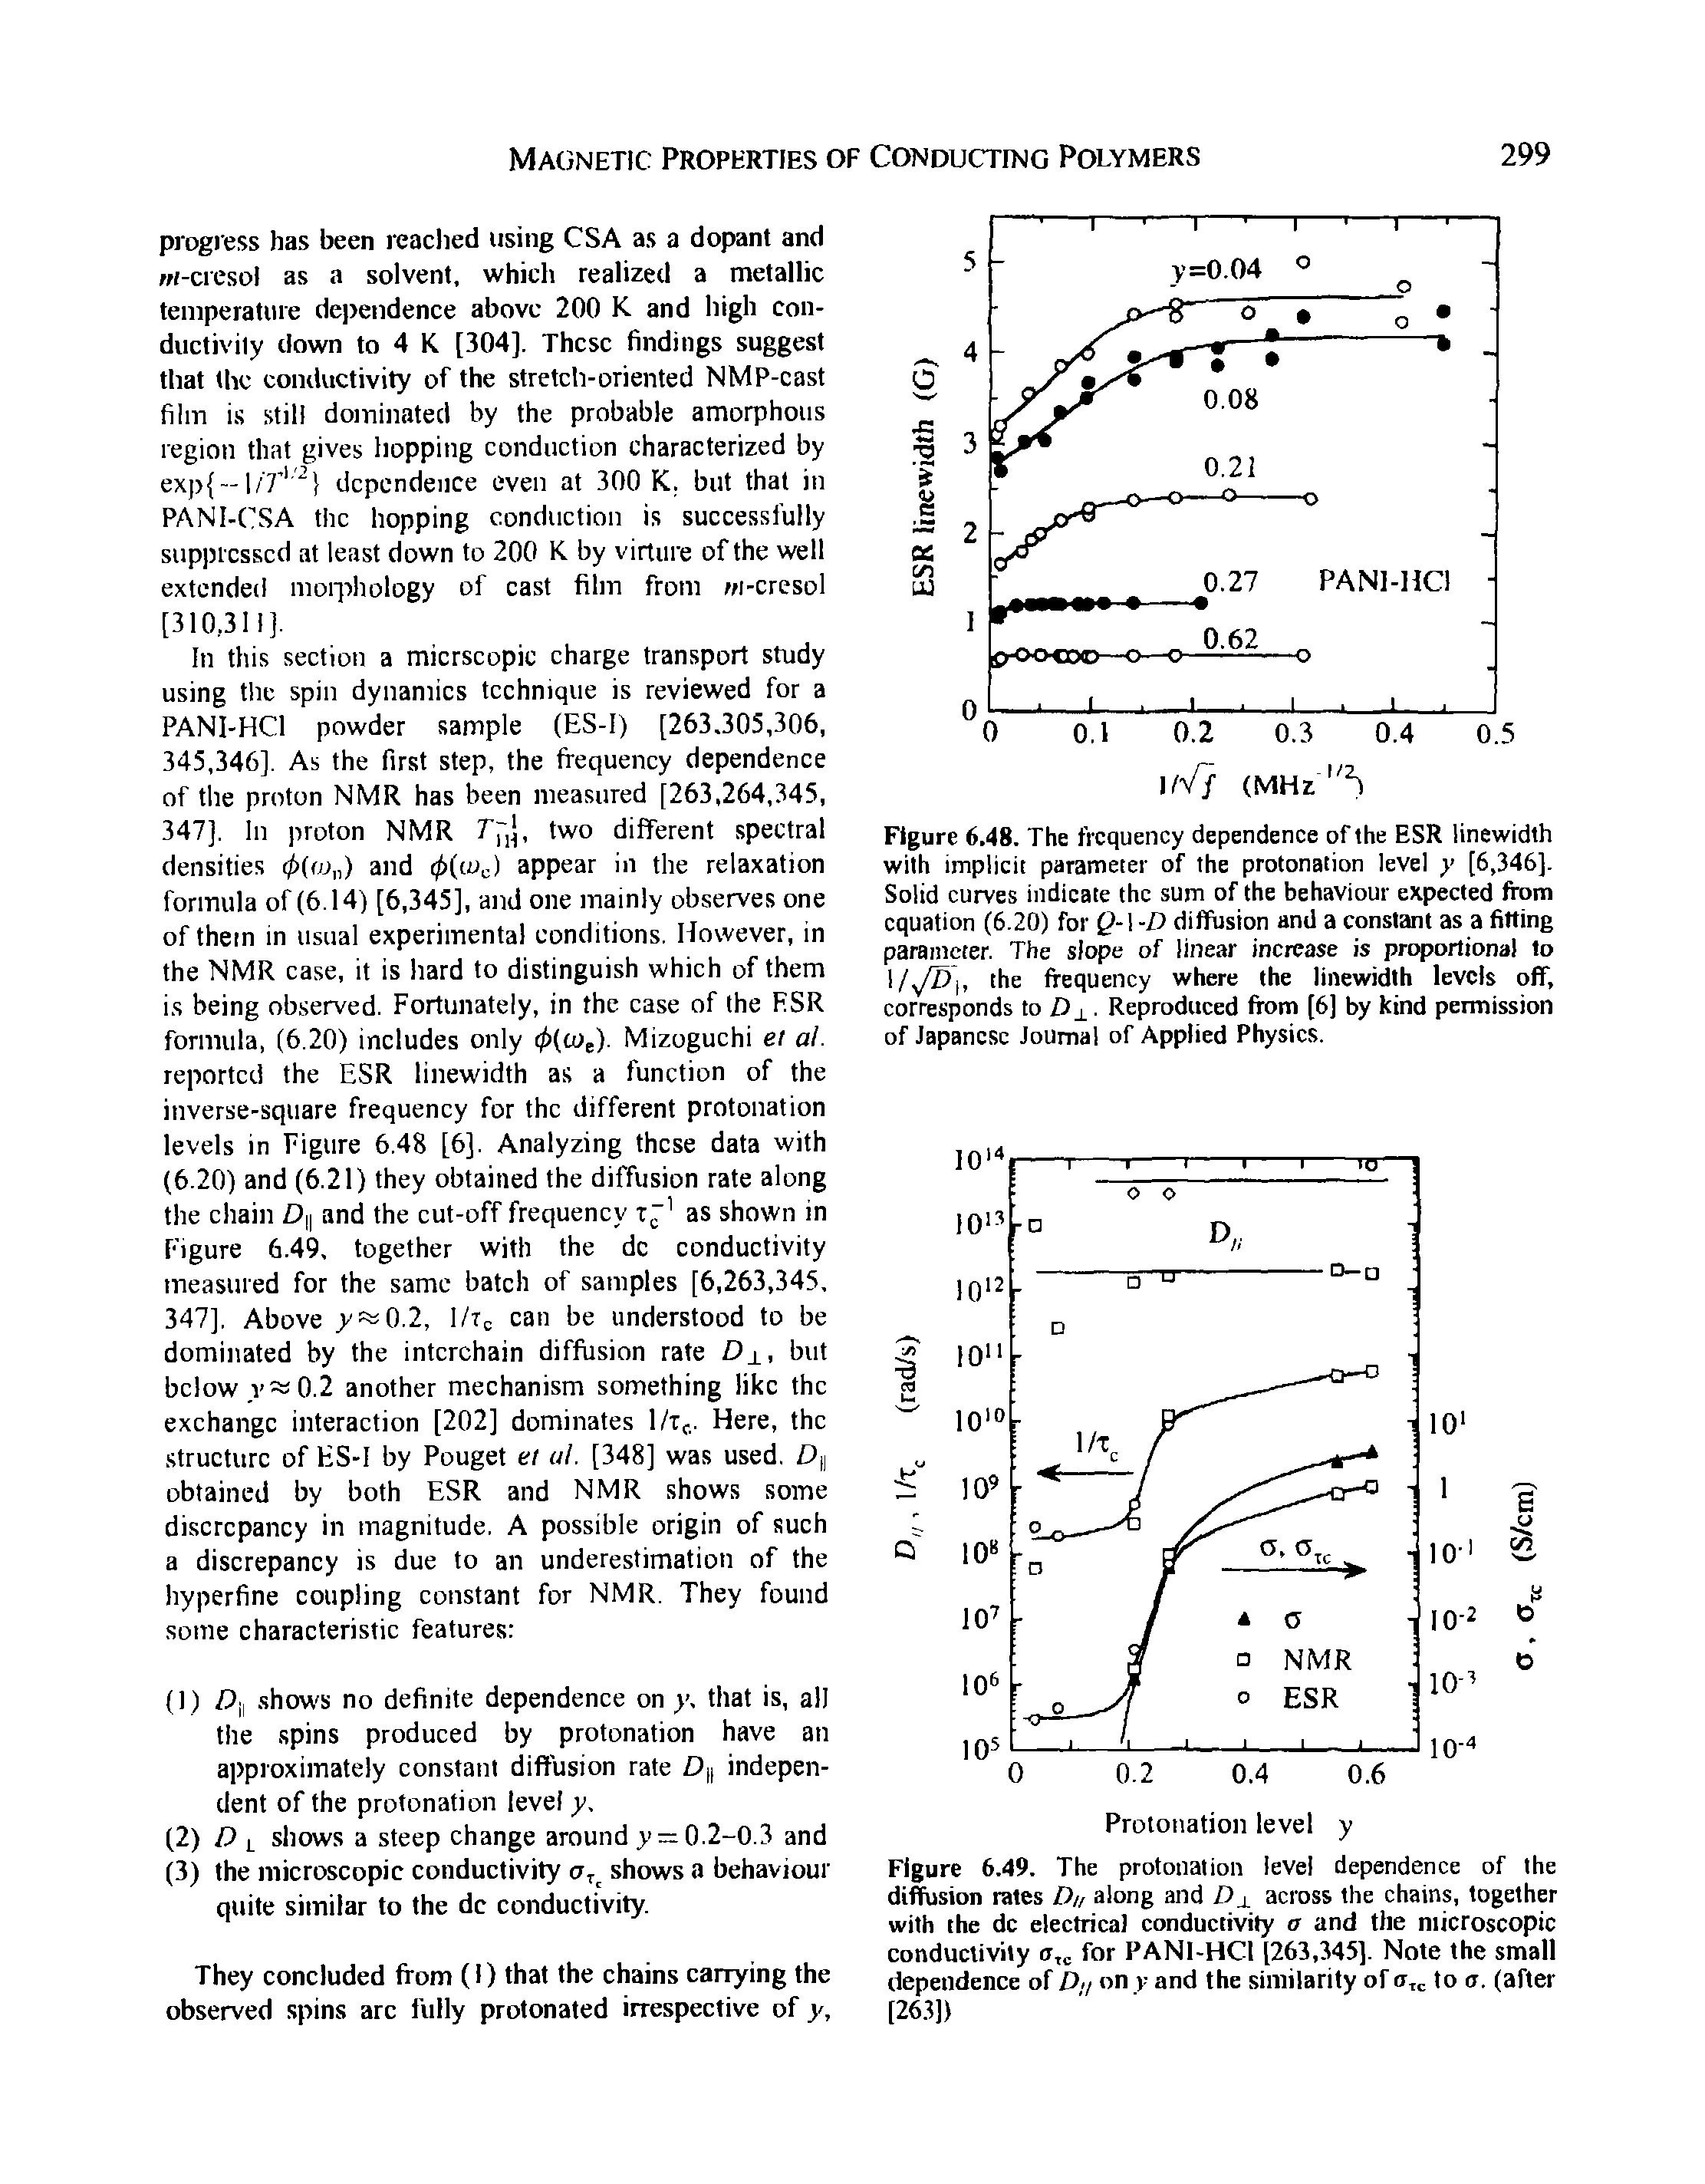 Figure 6.49. The protonation level dependence of the diffusion rates D// along and across the chains, together with the dc electrical conductivity a and the microscopic conductivity < for PANl-HCl [263,345], Note the small dependence of Dy on v and the similarity of to a. (after [263])...